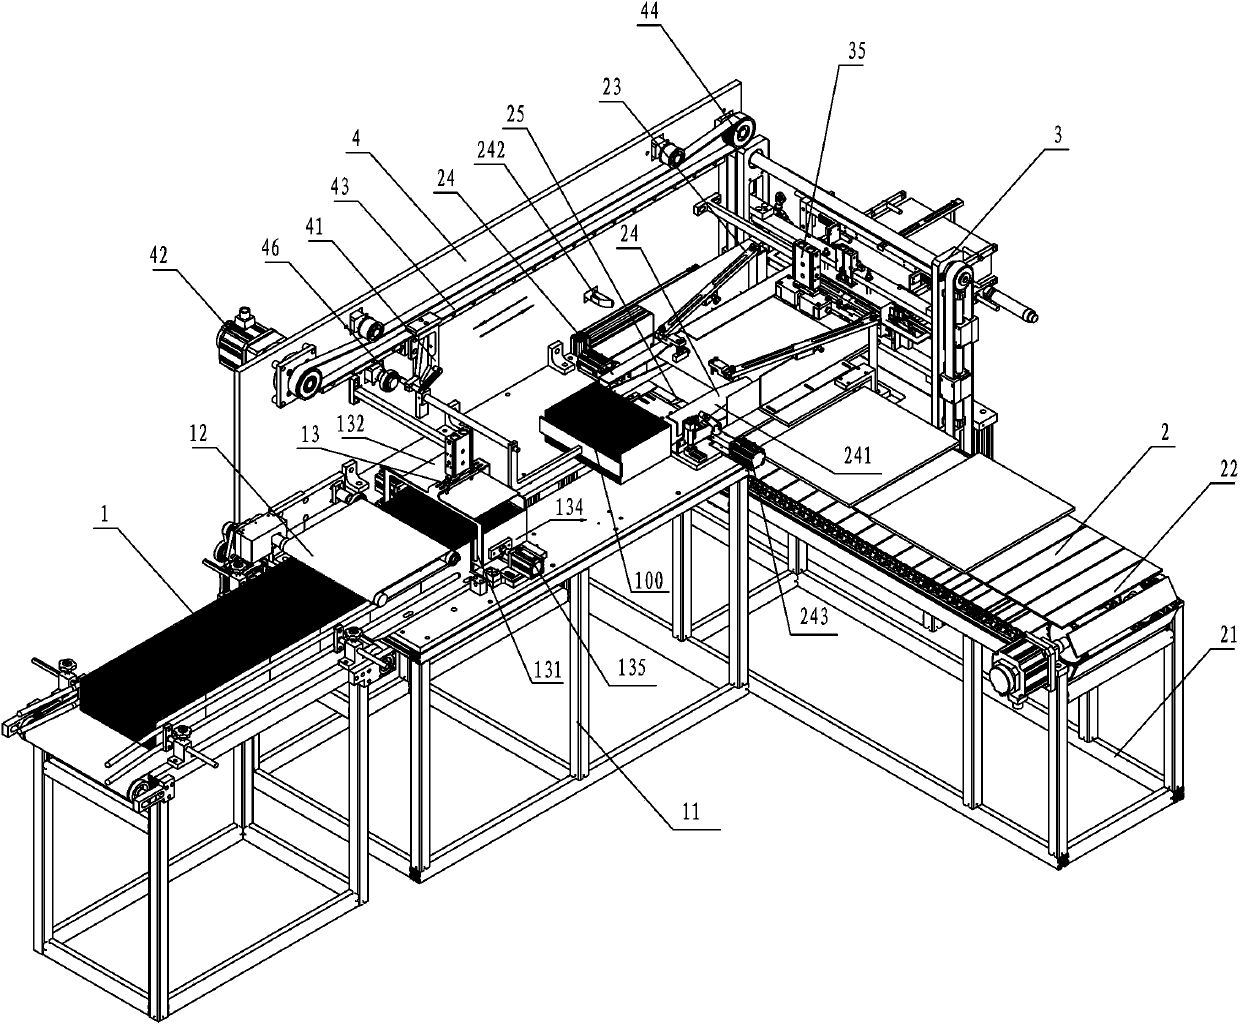 Middle packaging machine